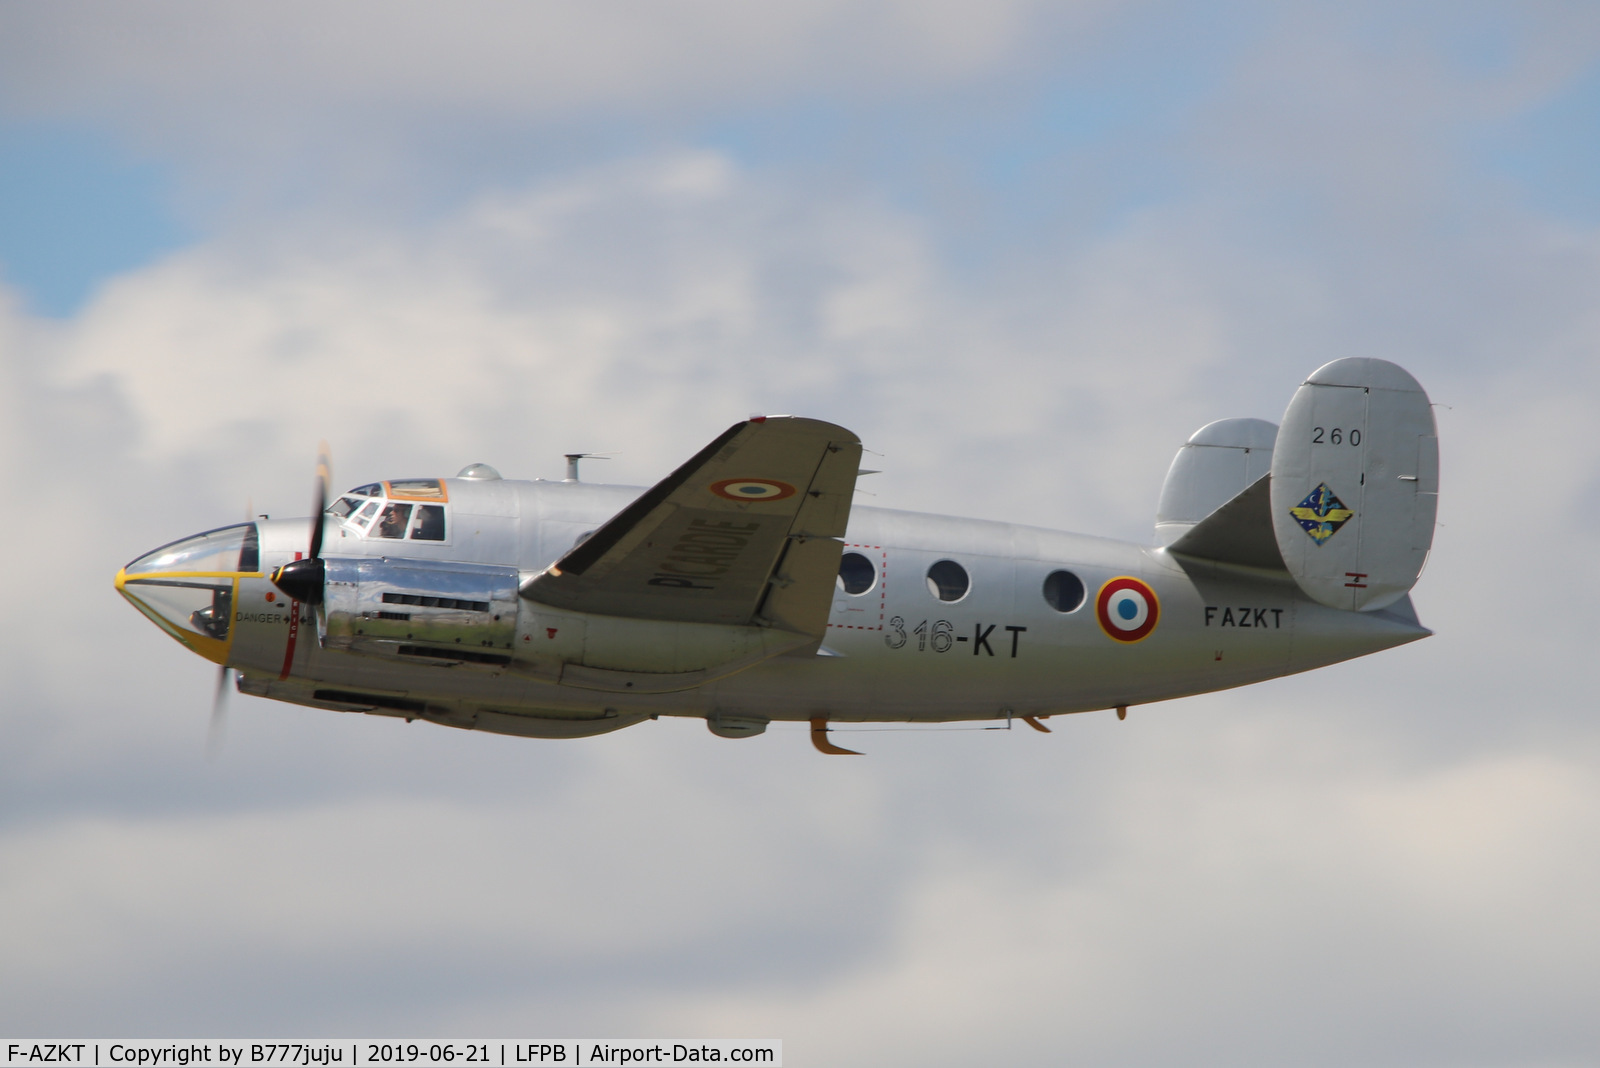 F-AZKT, 1954 Dassault MD-311 Flamant C/N 260, on display at SIAE 2019